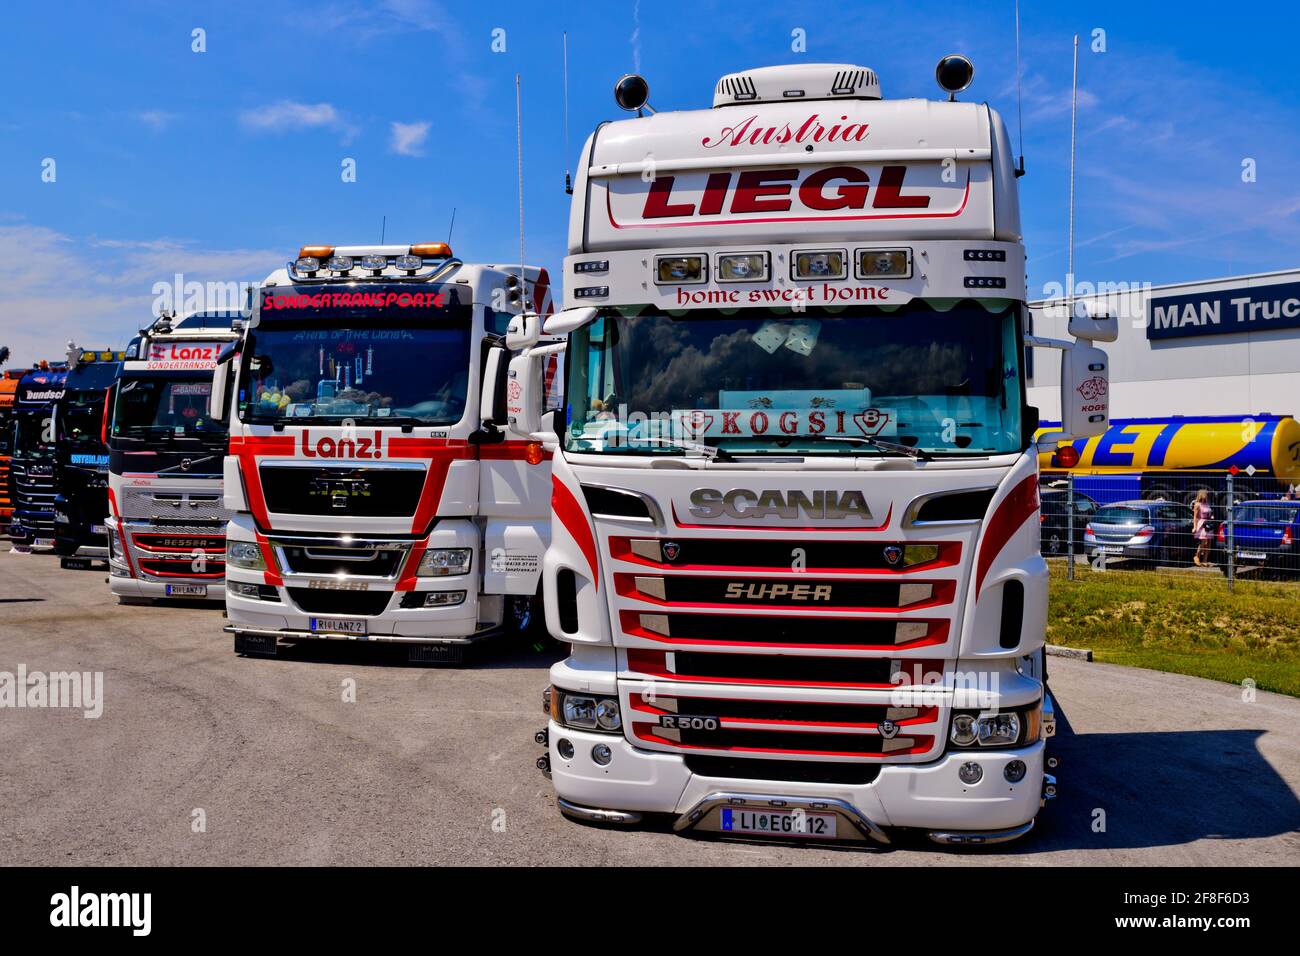 vorchdorf, austria, 02 july 2016, man truck and scania r500 at a truck event Stock Photo